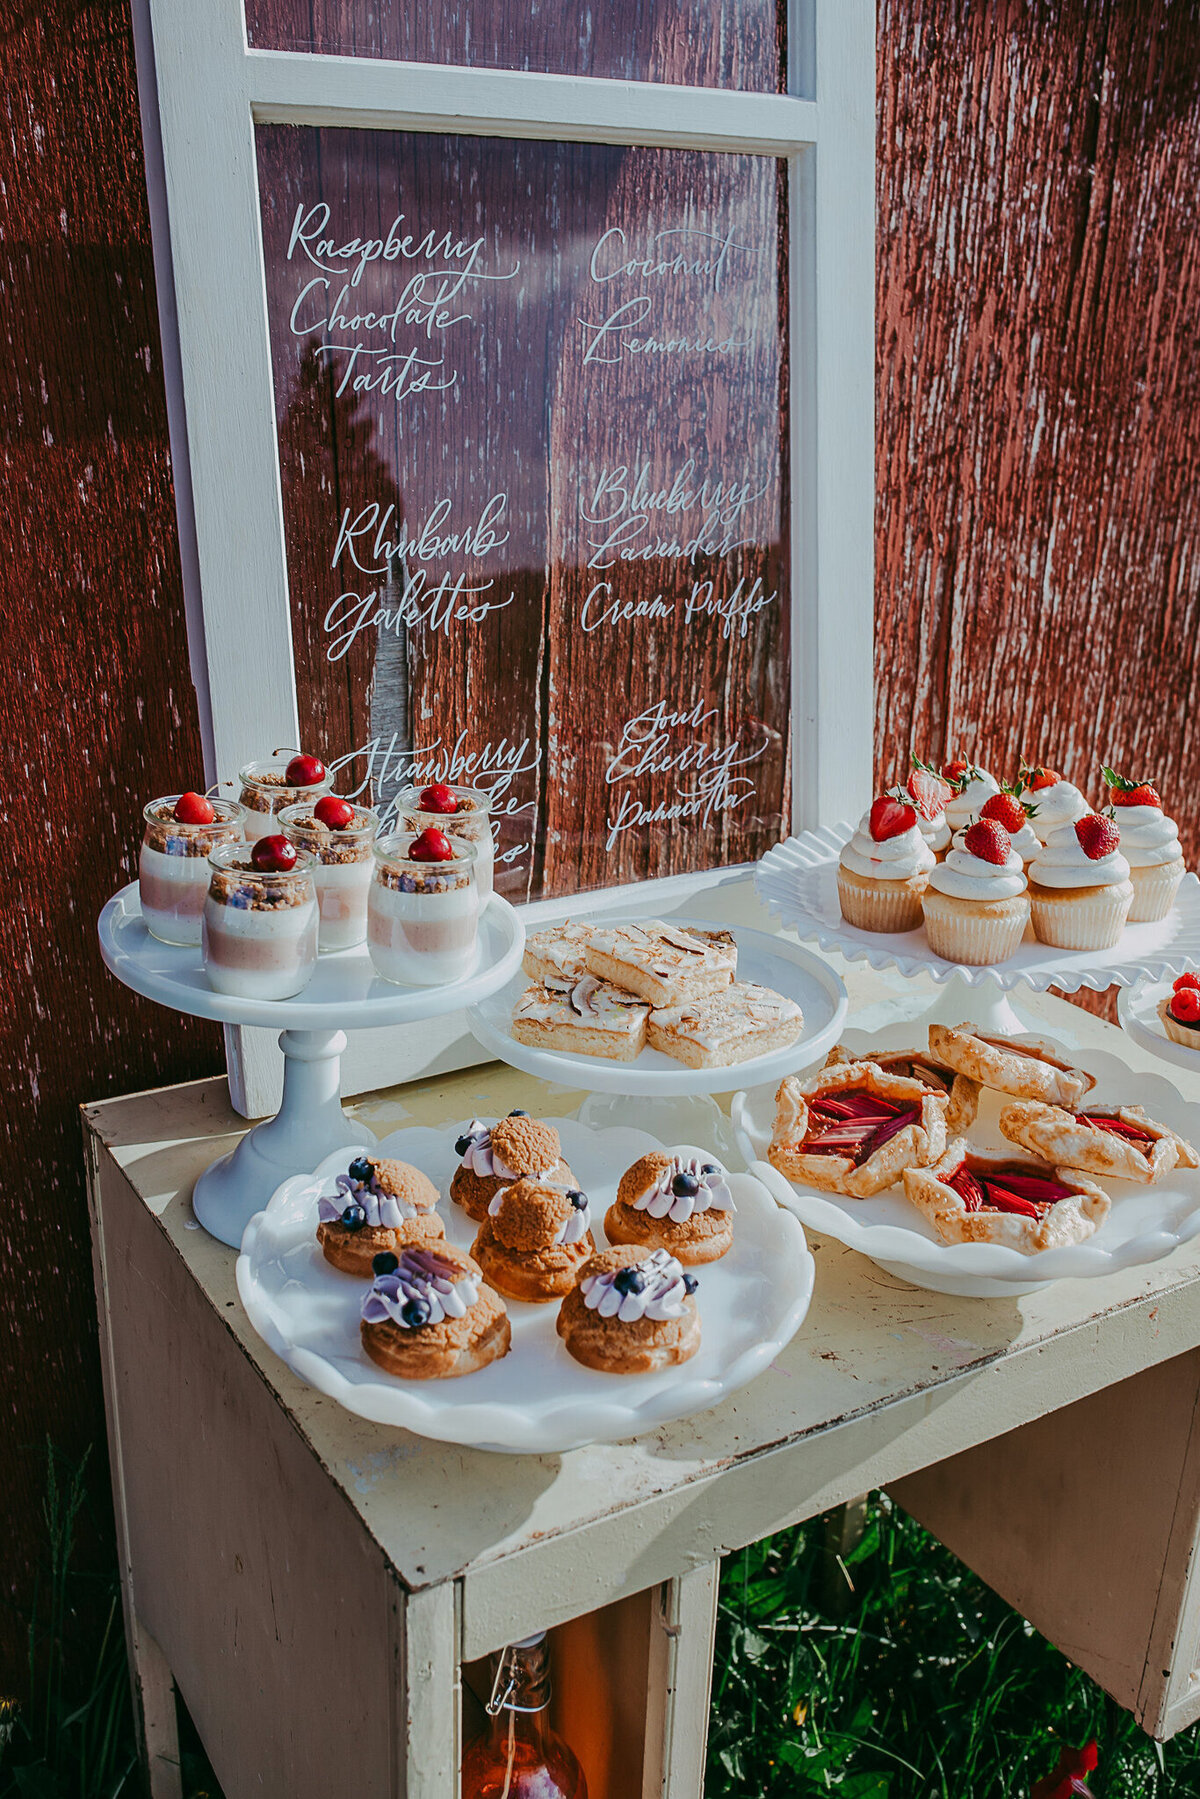 Rustic desert table with vintage window, by Lemonberry Pastries, contemporary cakes & desserts in Calgary, Alberta, featured on the Brontë Bride Vendor Guide.